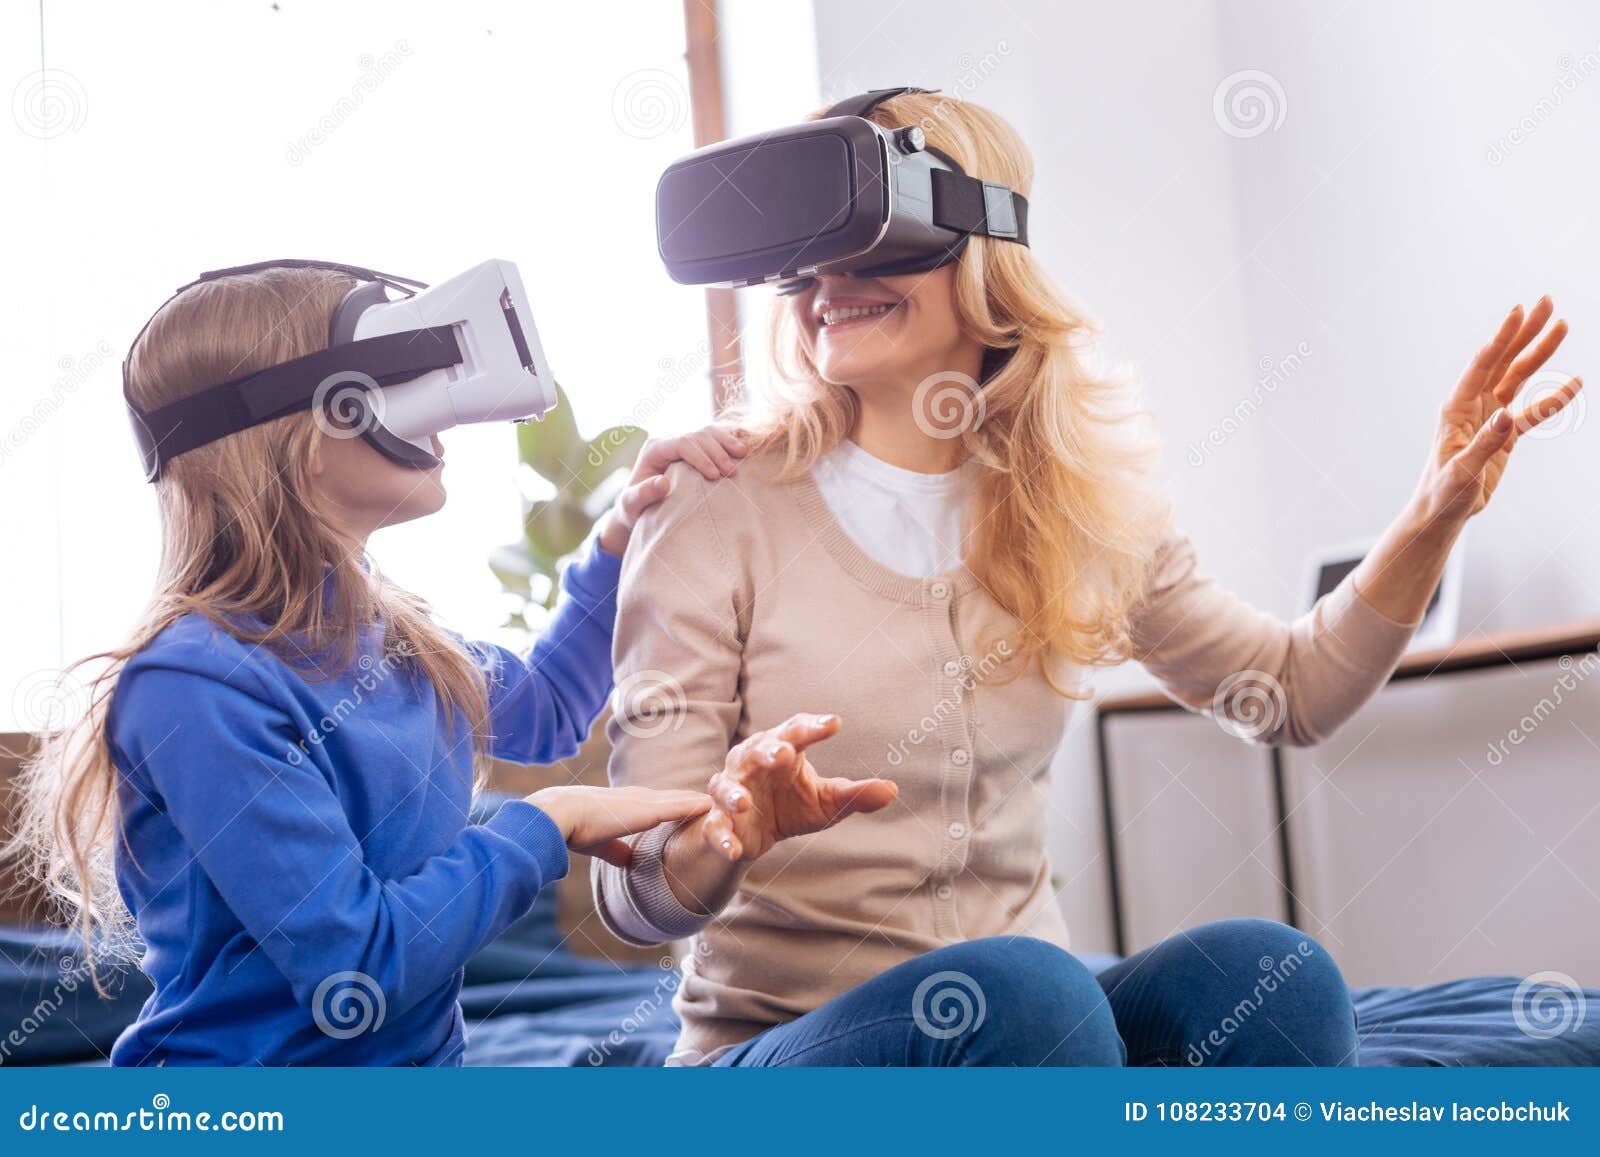 Content Mother and Her Kid VR Headset Stock Photo Image of device, guidance: 108233704